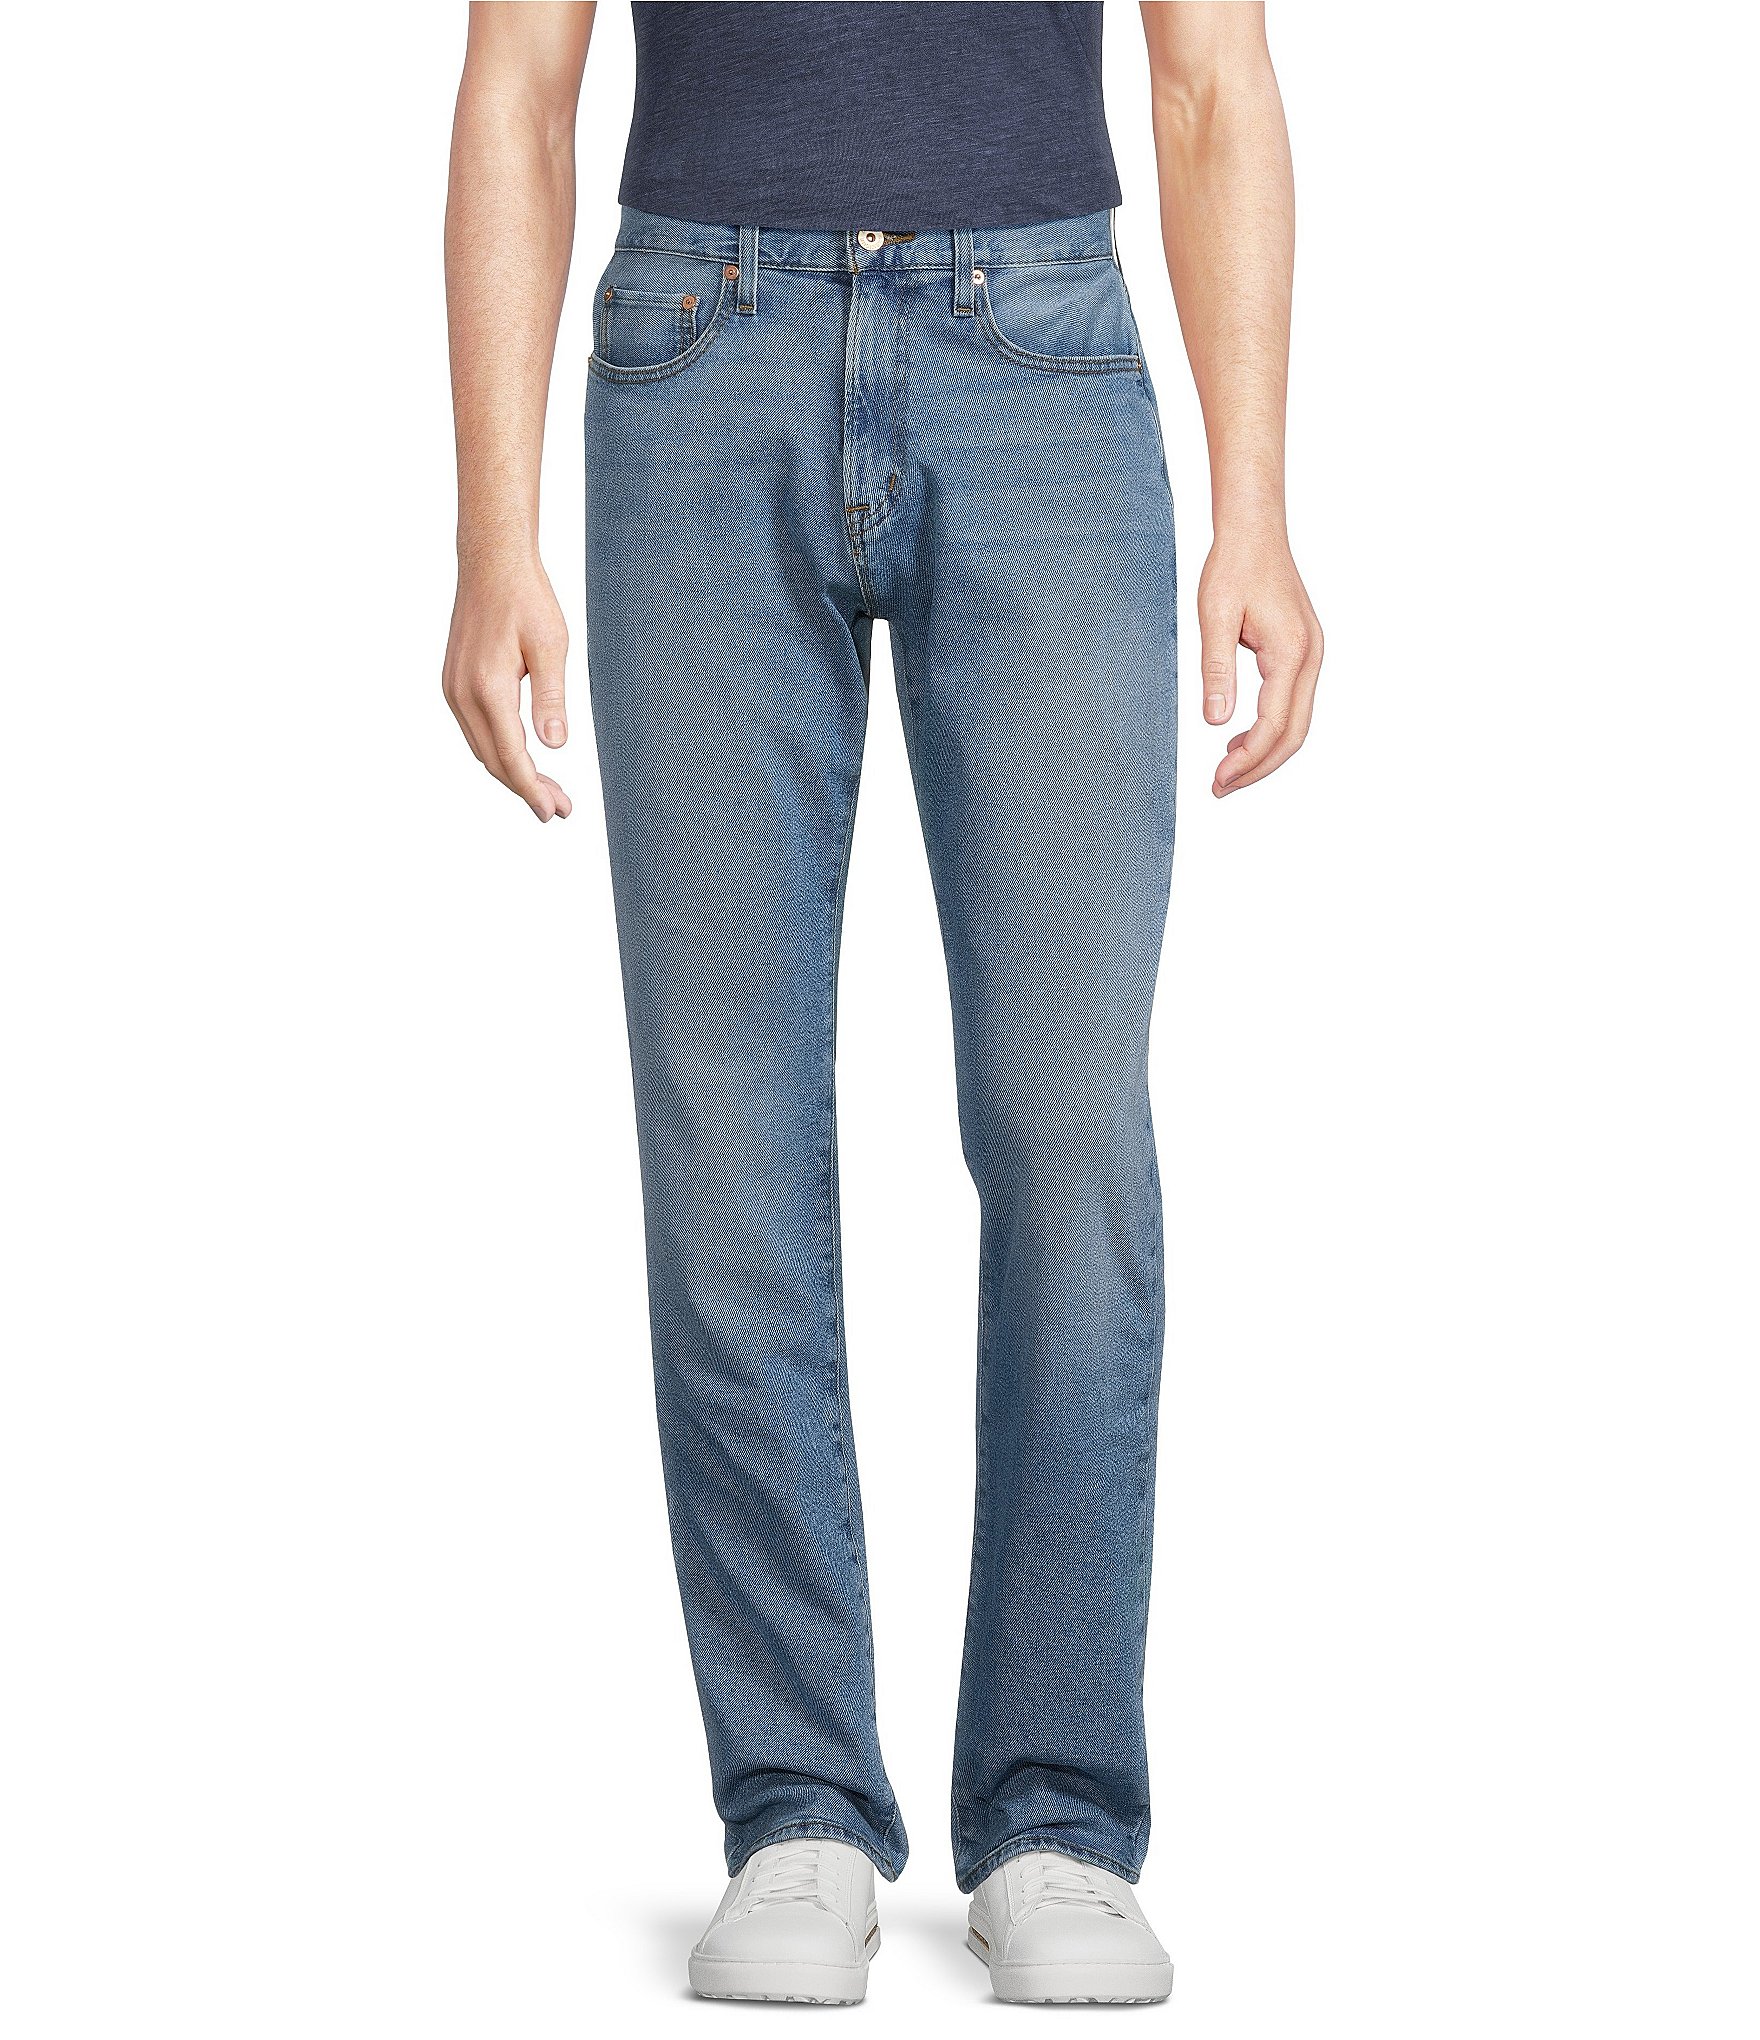 Cremieux Relaxed Straight Fit Light Blue Jeans | Dillard's